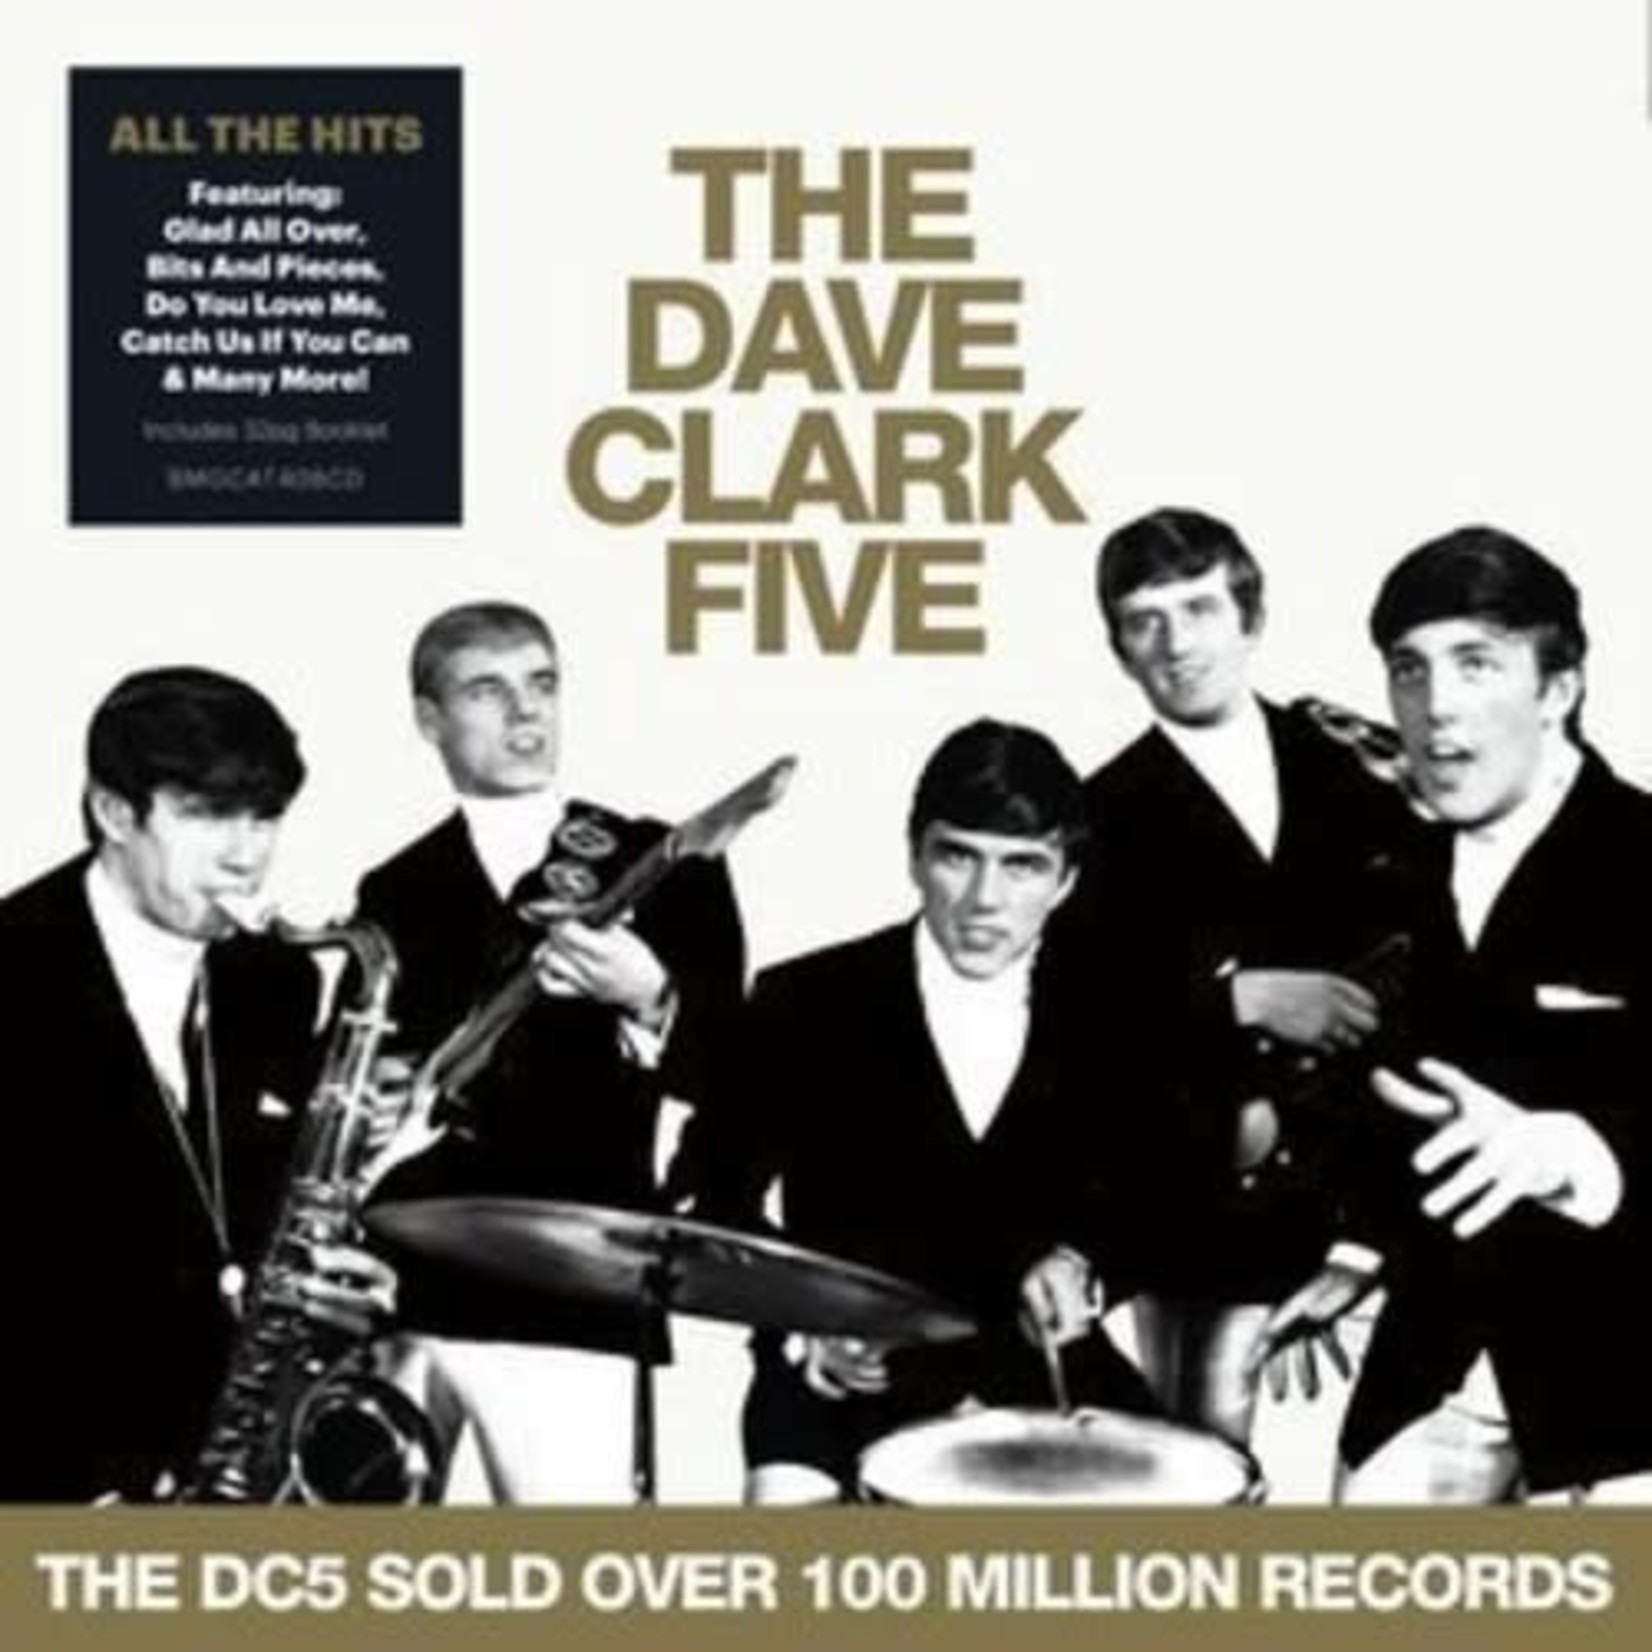 Dave Clark Five - All The Hits [LP]